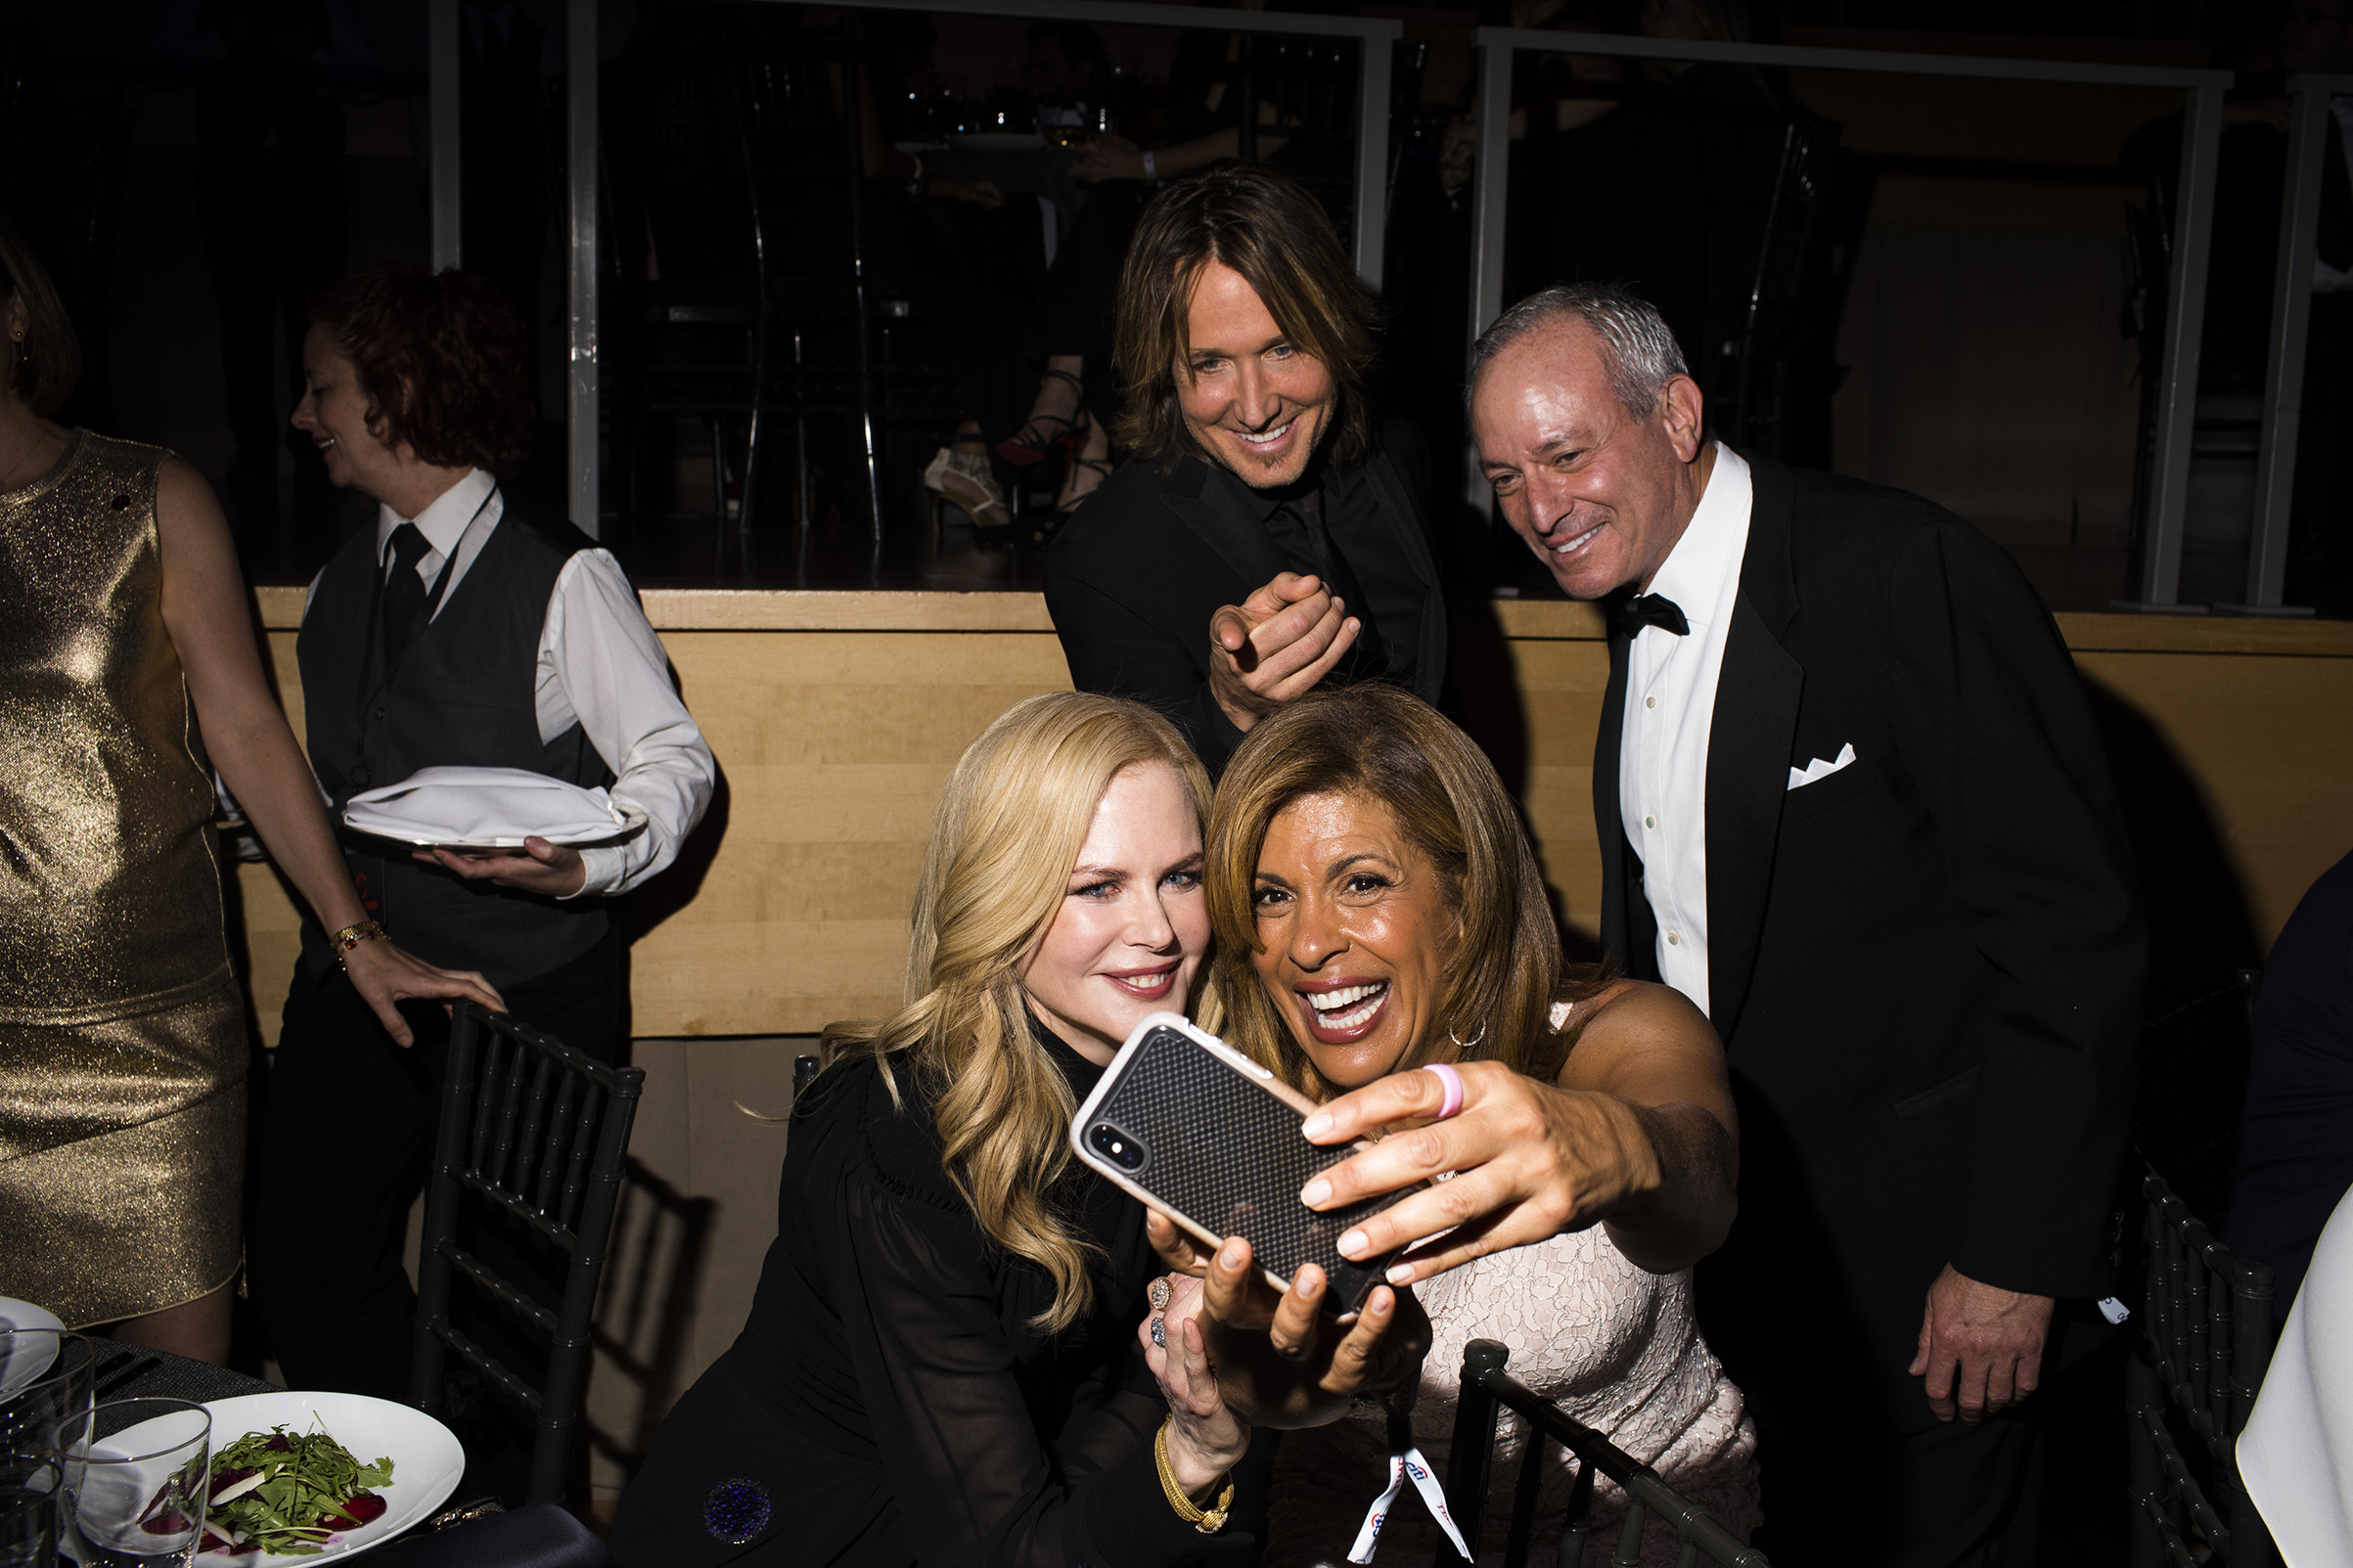 Nicole Kidman, Hoda Kotb, Keith Urban and Joel Schiffman take a photo at the Time 100 Gala at Jazz at Lincoln Center on April 24, 2018 in New York City. (Landon Nordeman for TIME)